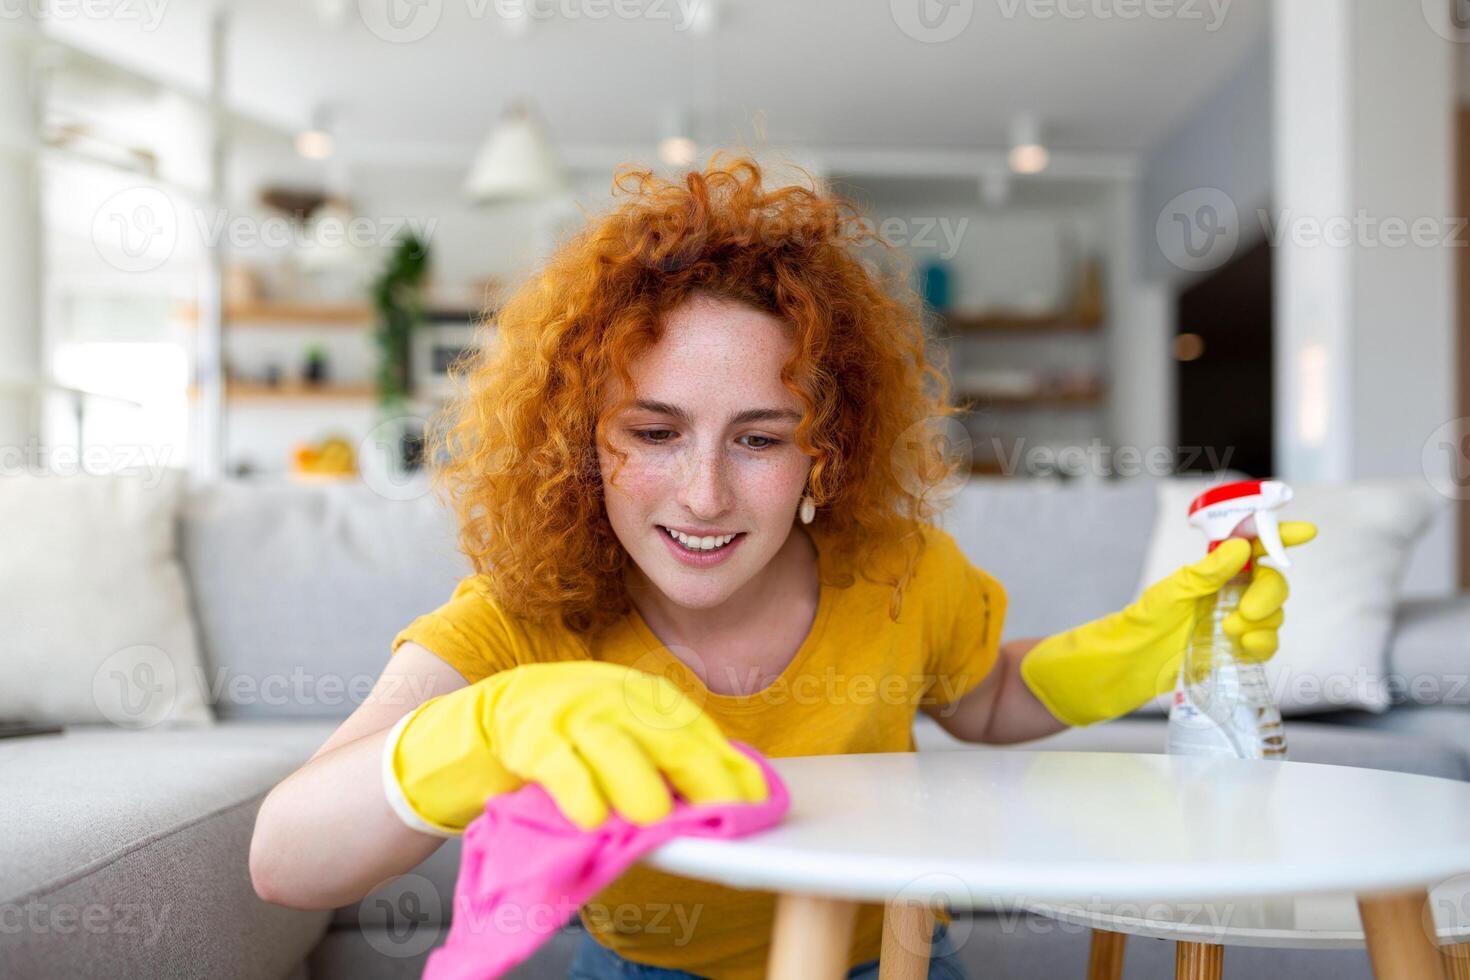 Beautiful young woman cleaning the house. Girl rubs dust. Smiling woman wearing rubber protective yellow gloves cleaning with rag and spray bottle detergent. Home, housekeeping concept. photo